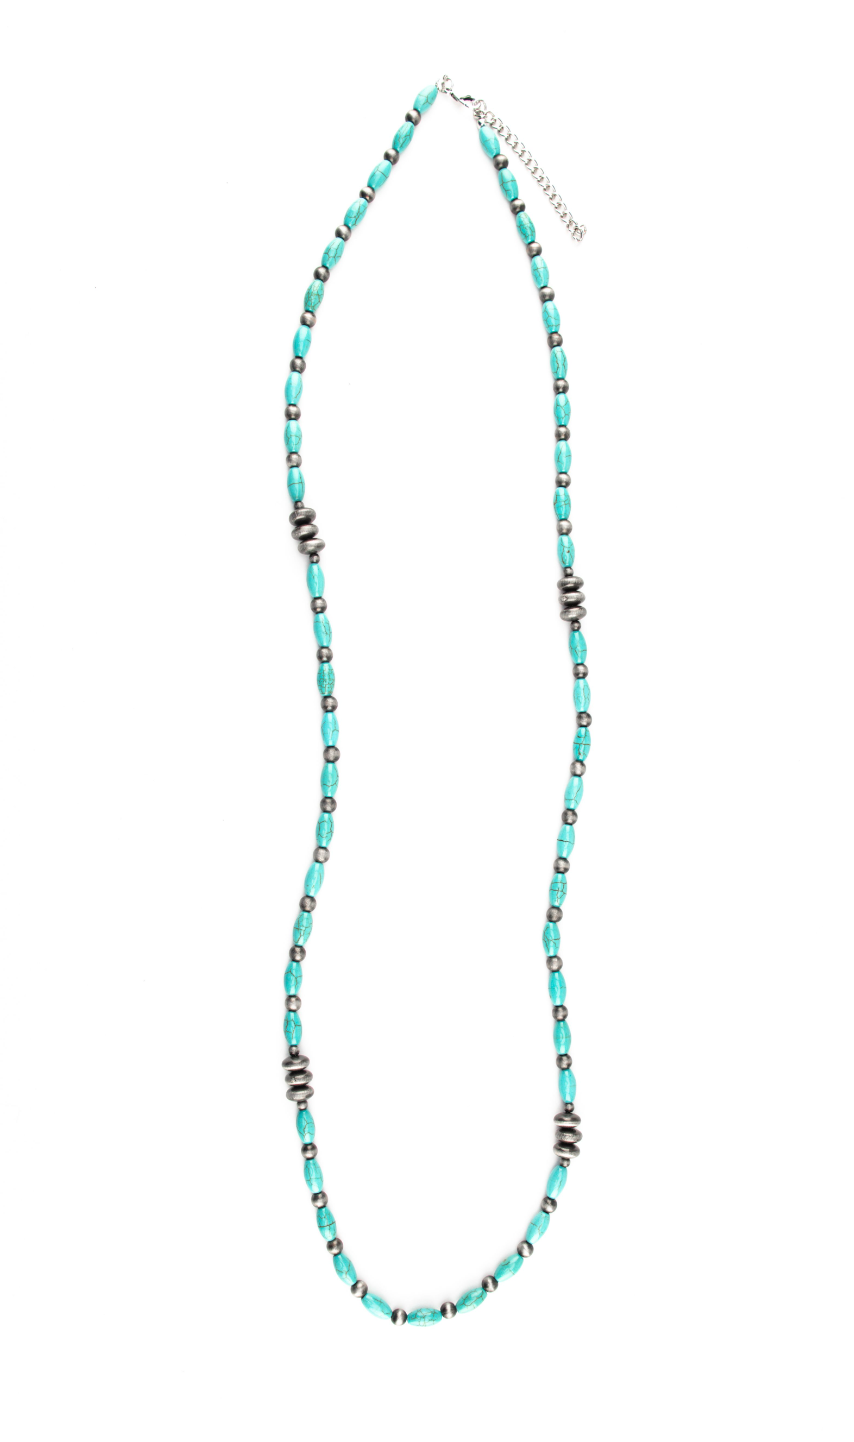 36" Green Turquoise and Faux Navajo Pearl Beaded Necklace with Faux Navajo Pearl Disc Accents